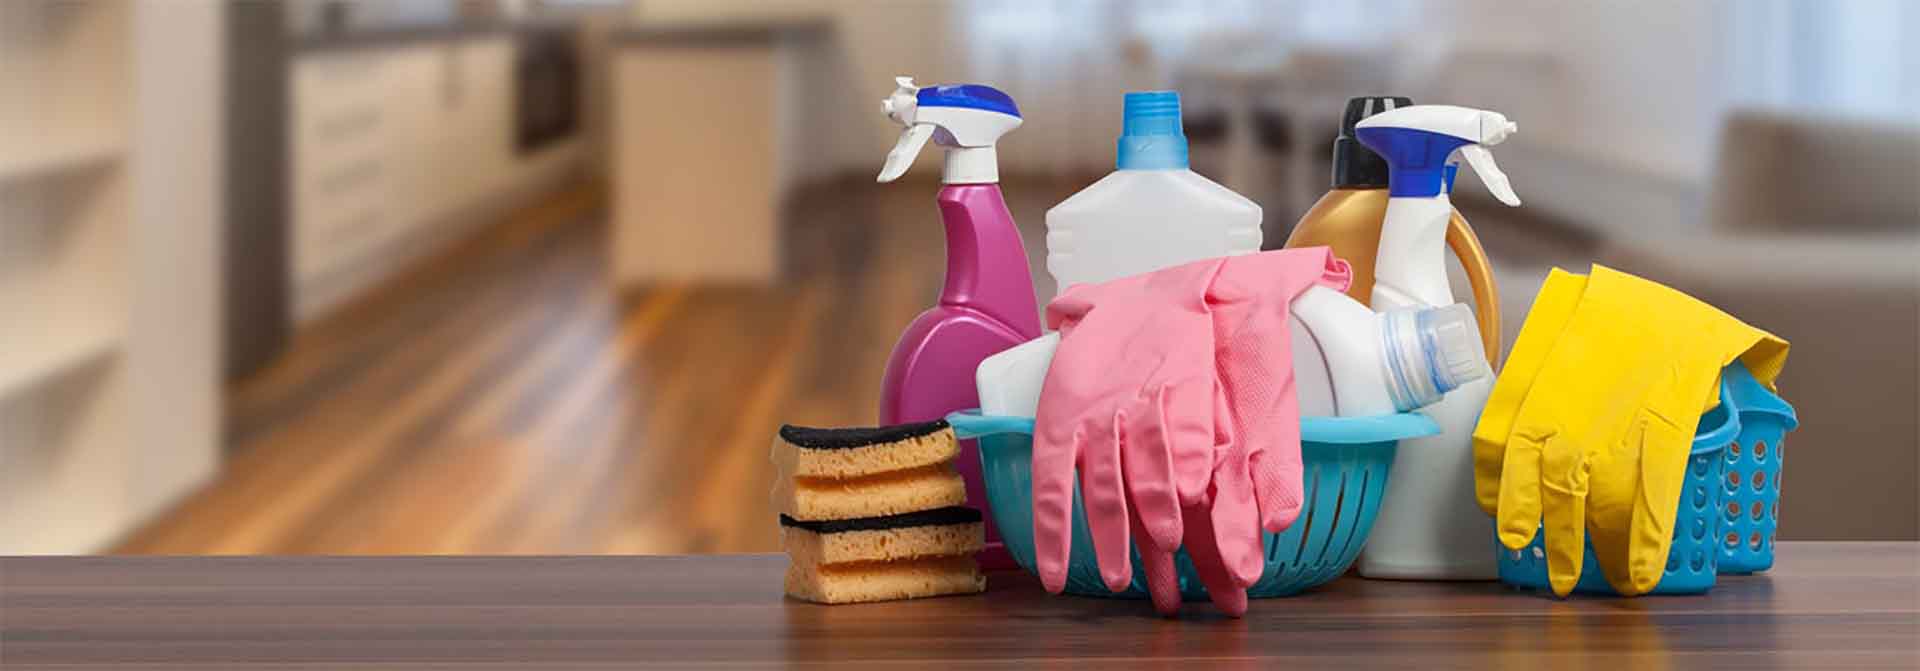 Level Two Cleaning and Disinfecting Safety